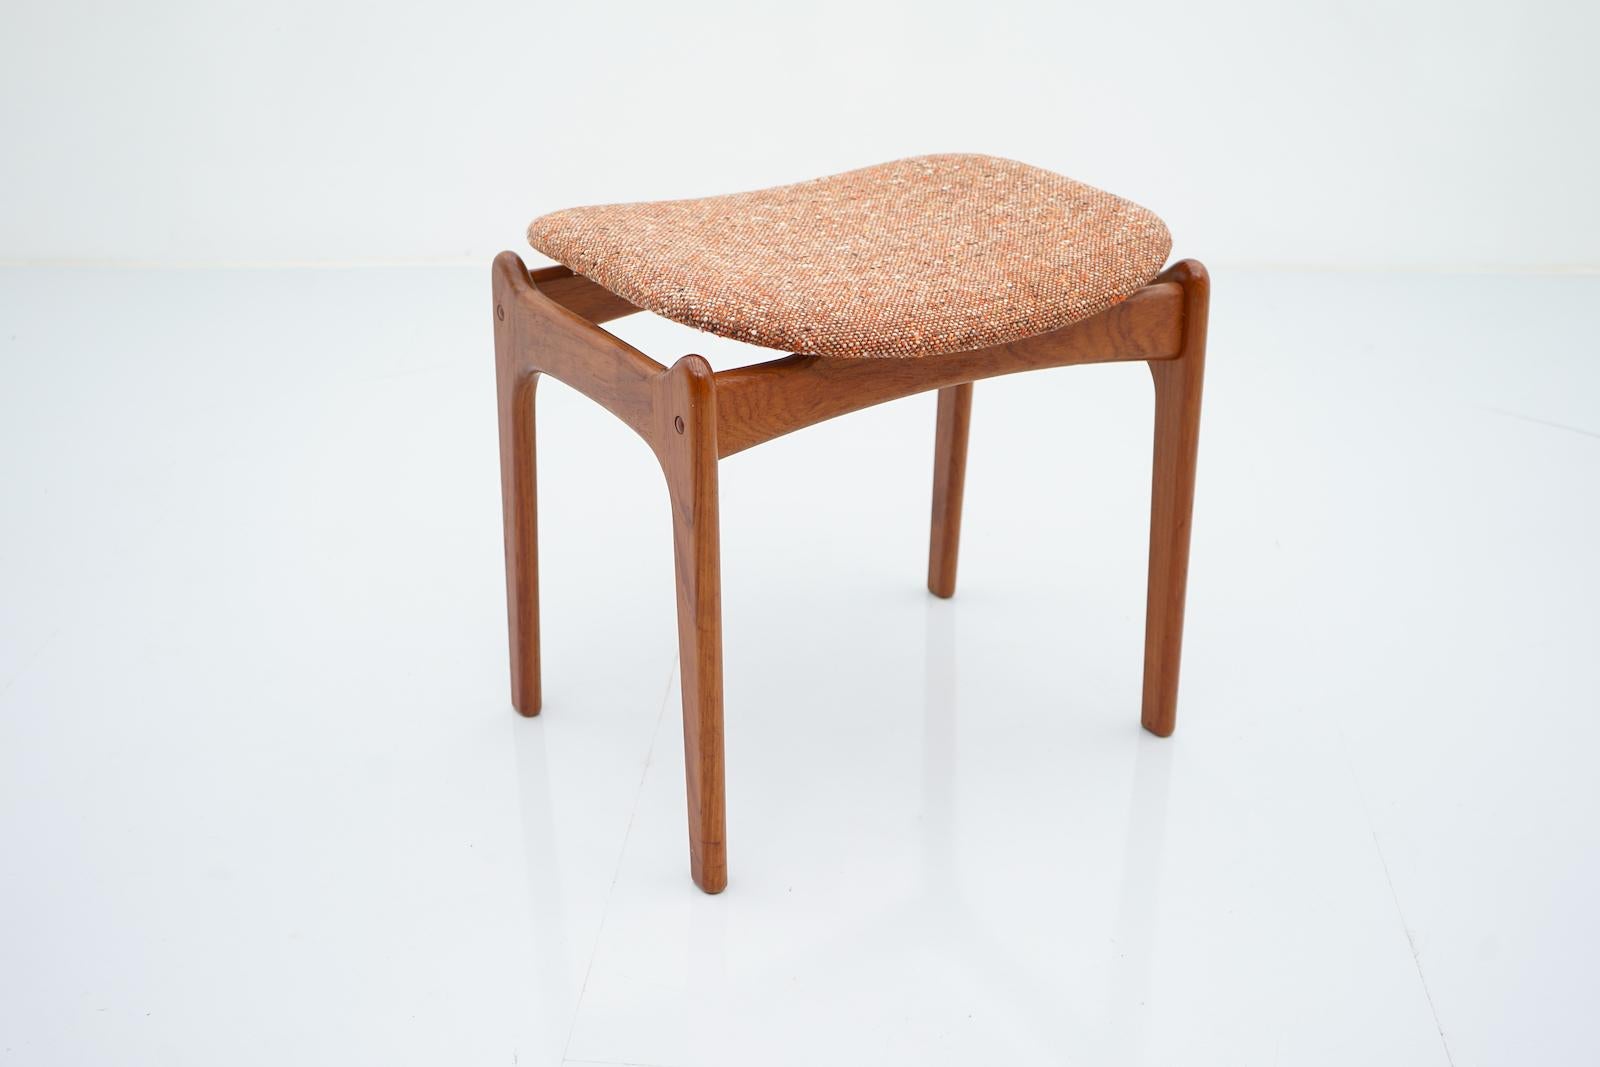 Stool in teak wood and wool by Erik Buch for O.D. Mobler, Denmark 1960s. Very nice workmanship and shape. Very good condition. 

Details

Creator: Erik Buch (Creator) O.D. Mobler(Maker)
Period: 1960s
Color: brown
Style: Scandinavian